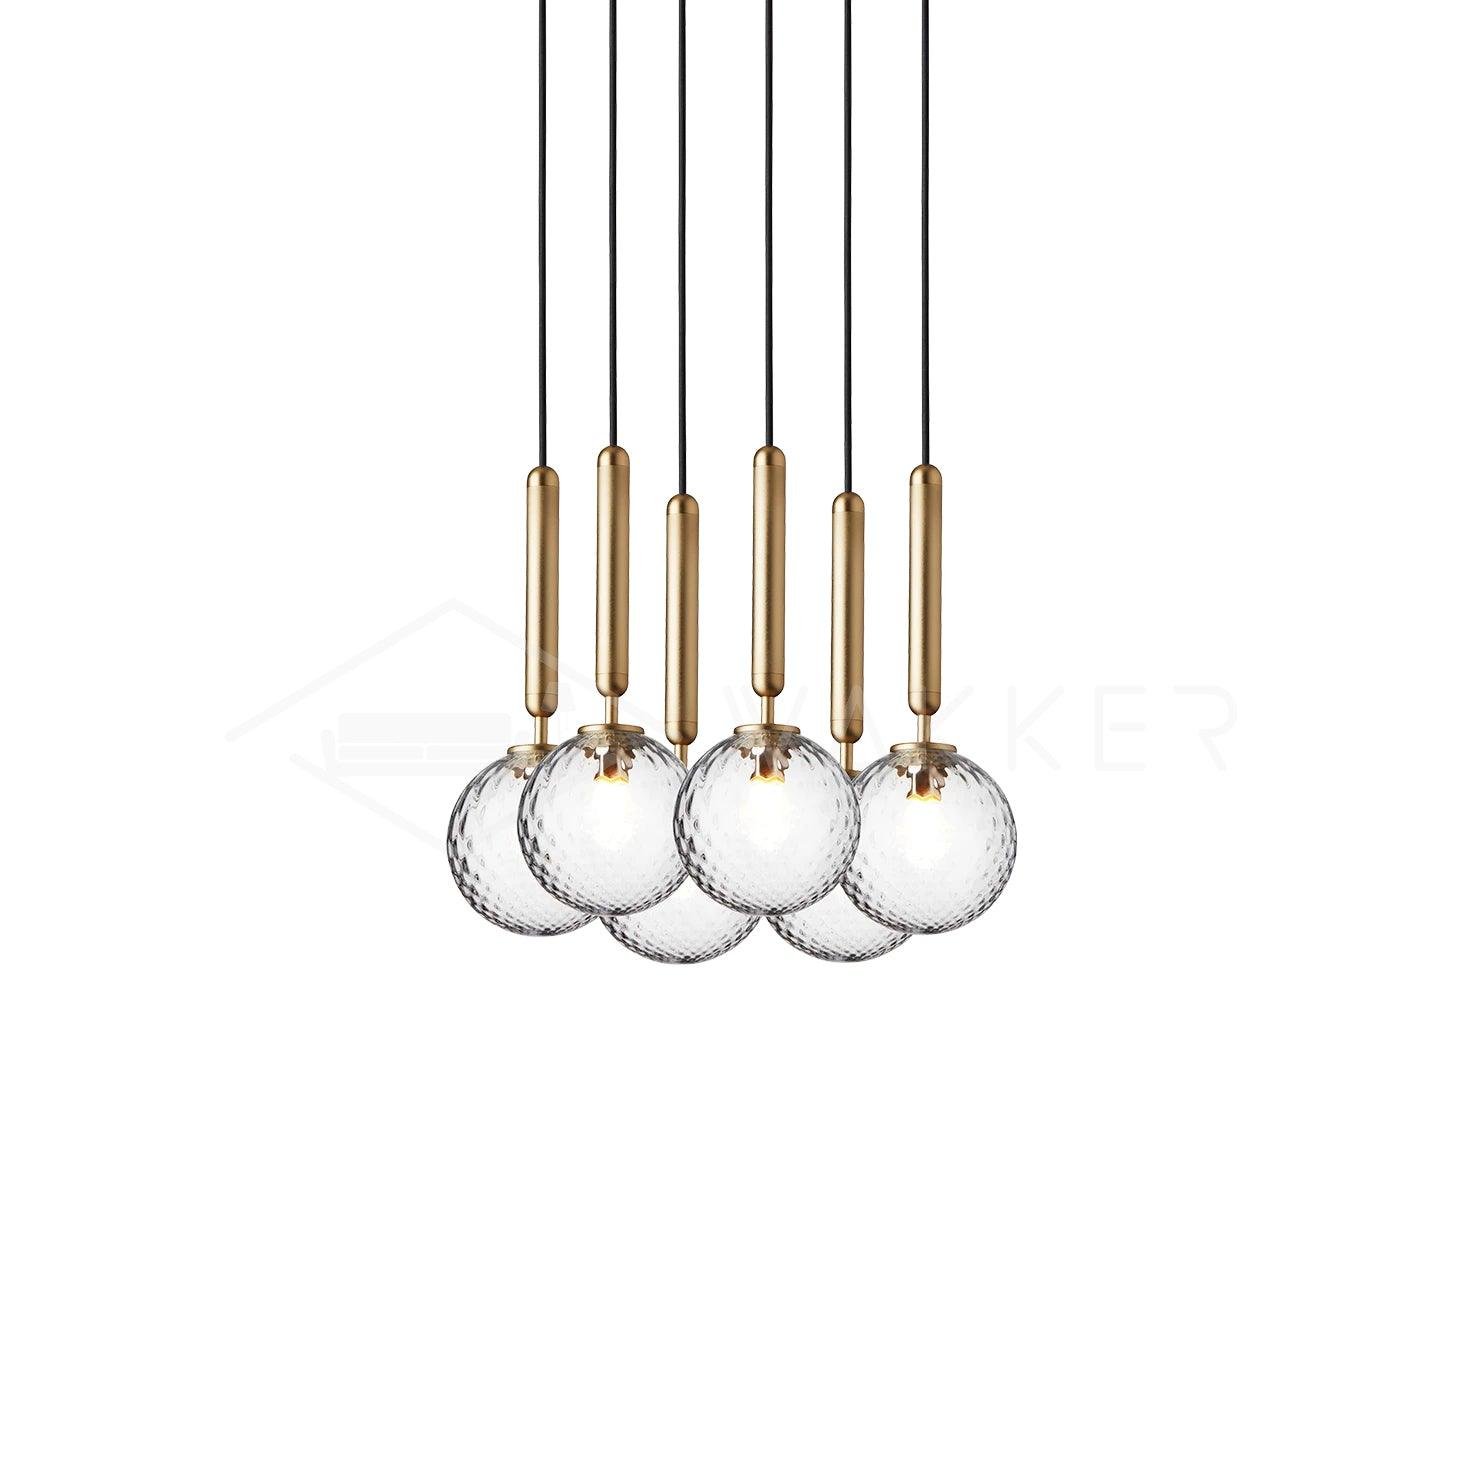 Miira Pendant Light with 6 heads, measuring 11.8 inches in diameter and 59 inches in height (30cm x 150cm), in a Gold and Clear finish.